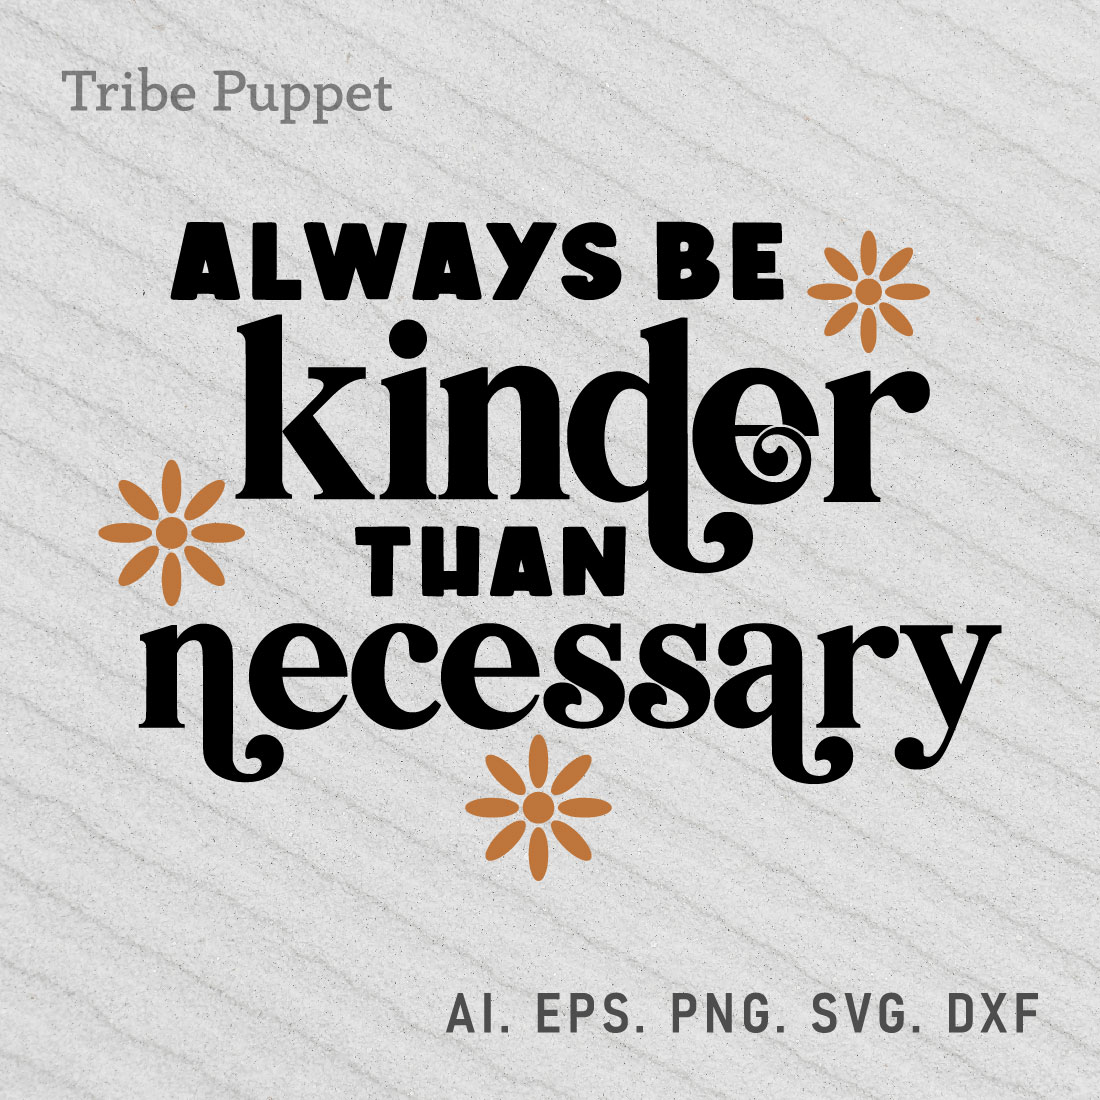 Kindness Typography preview image.